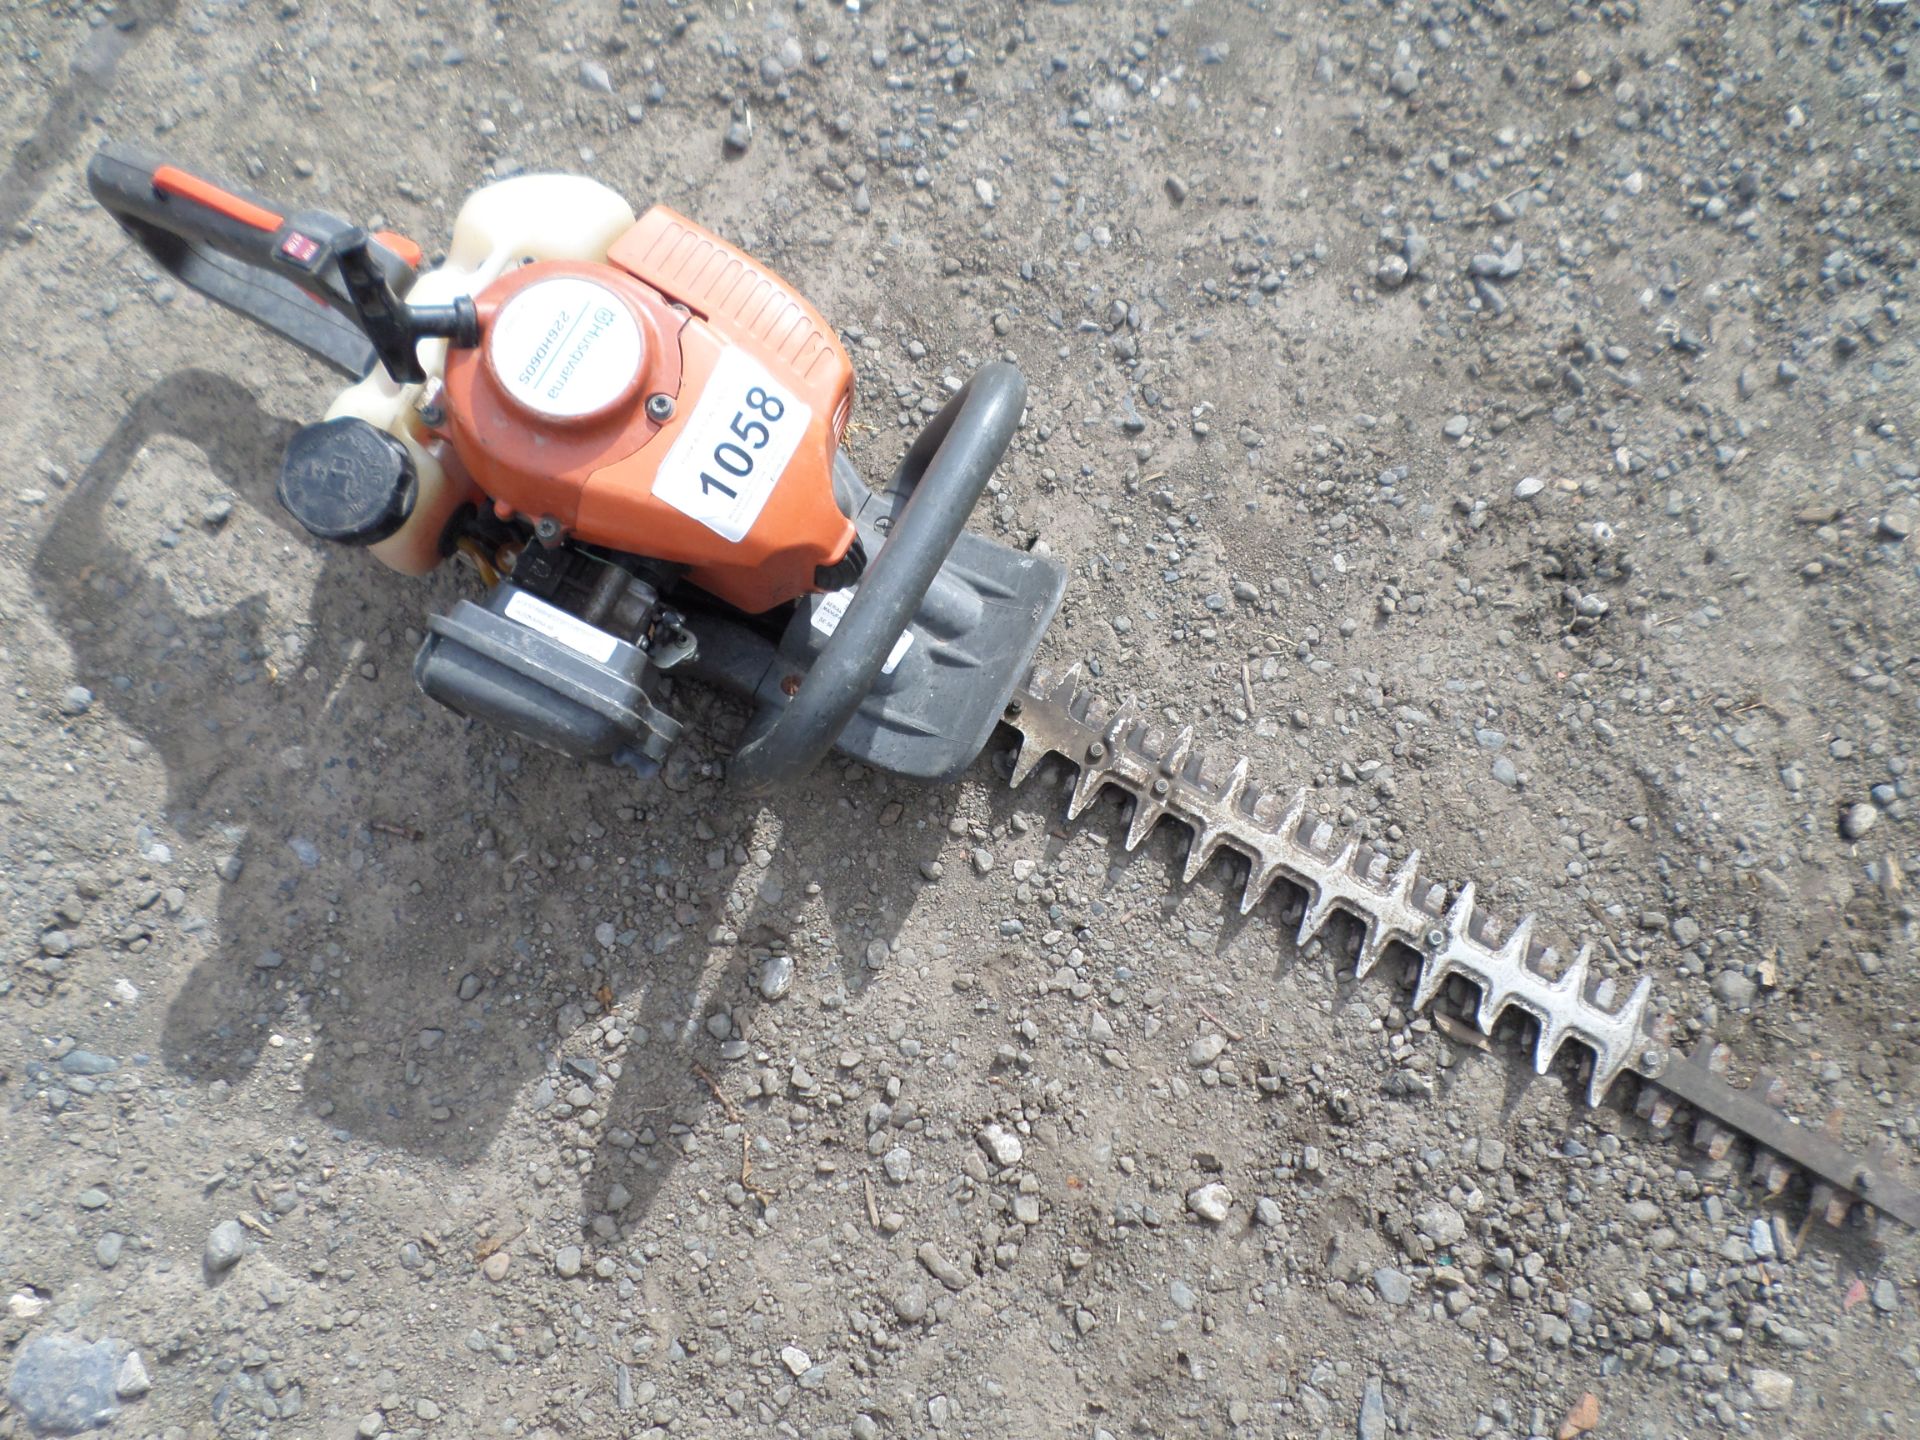 Husqvarna double sided hedge trimmer, non runner in need of service